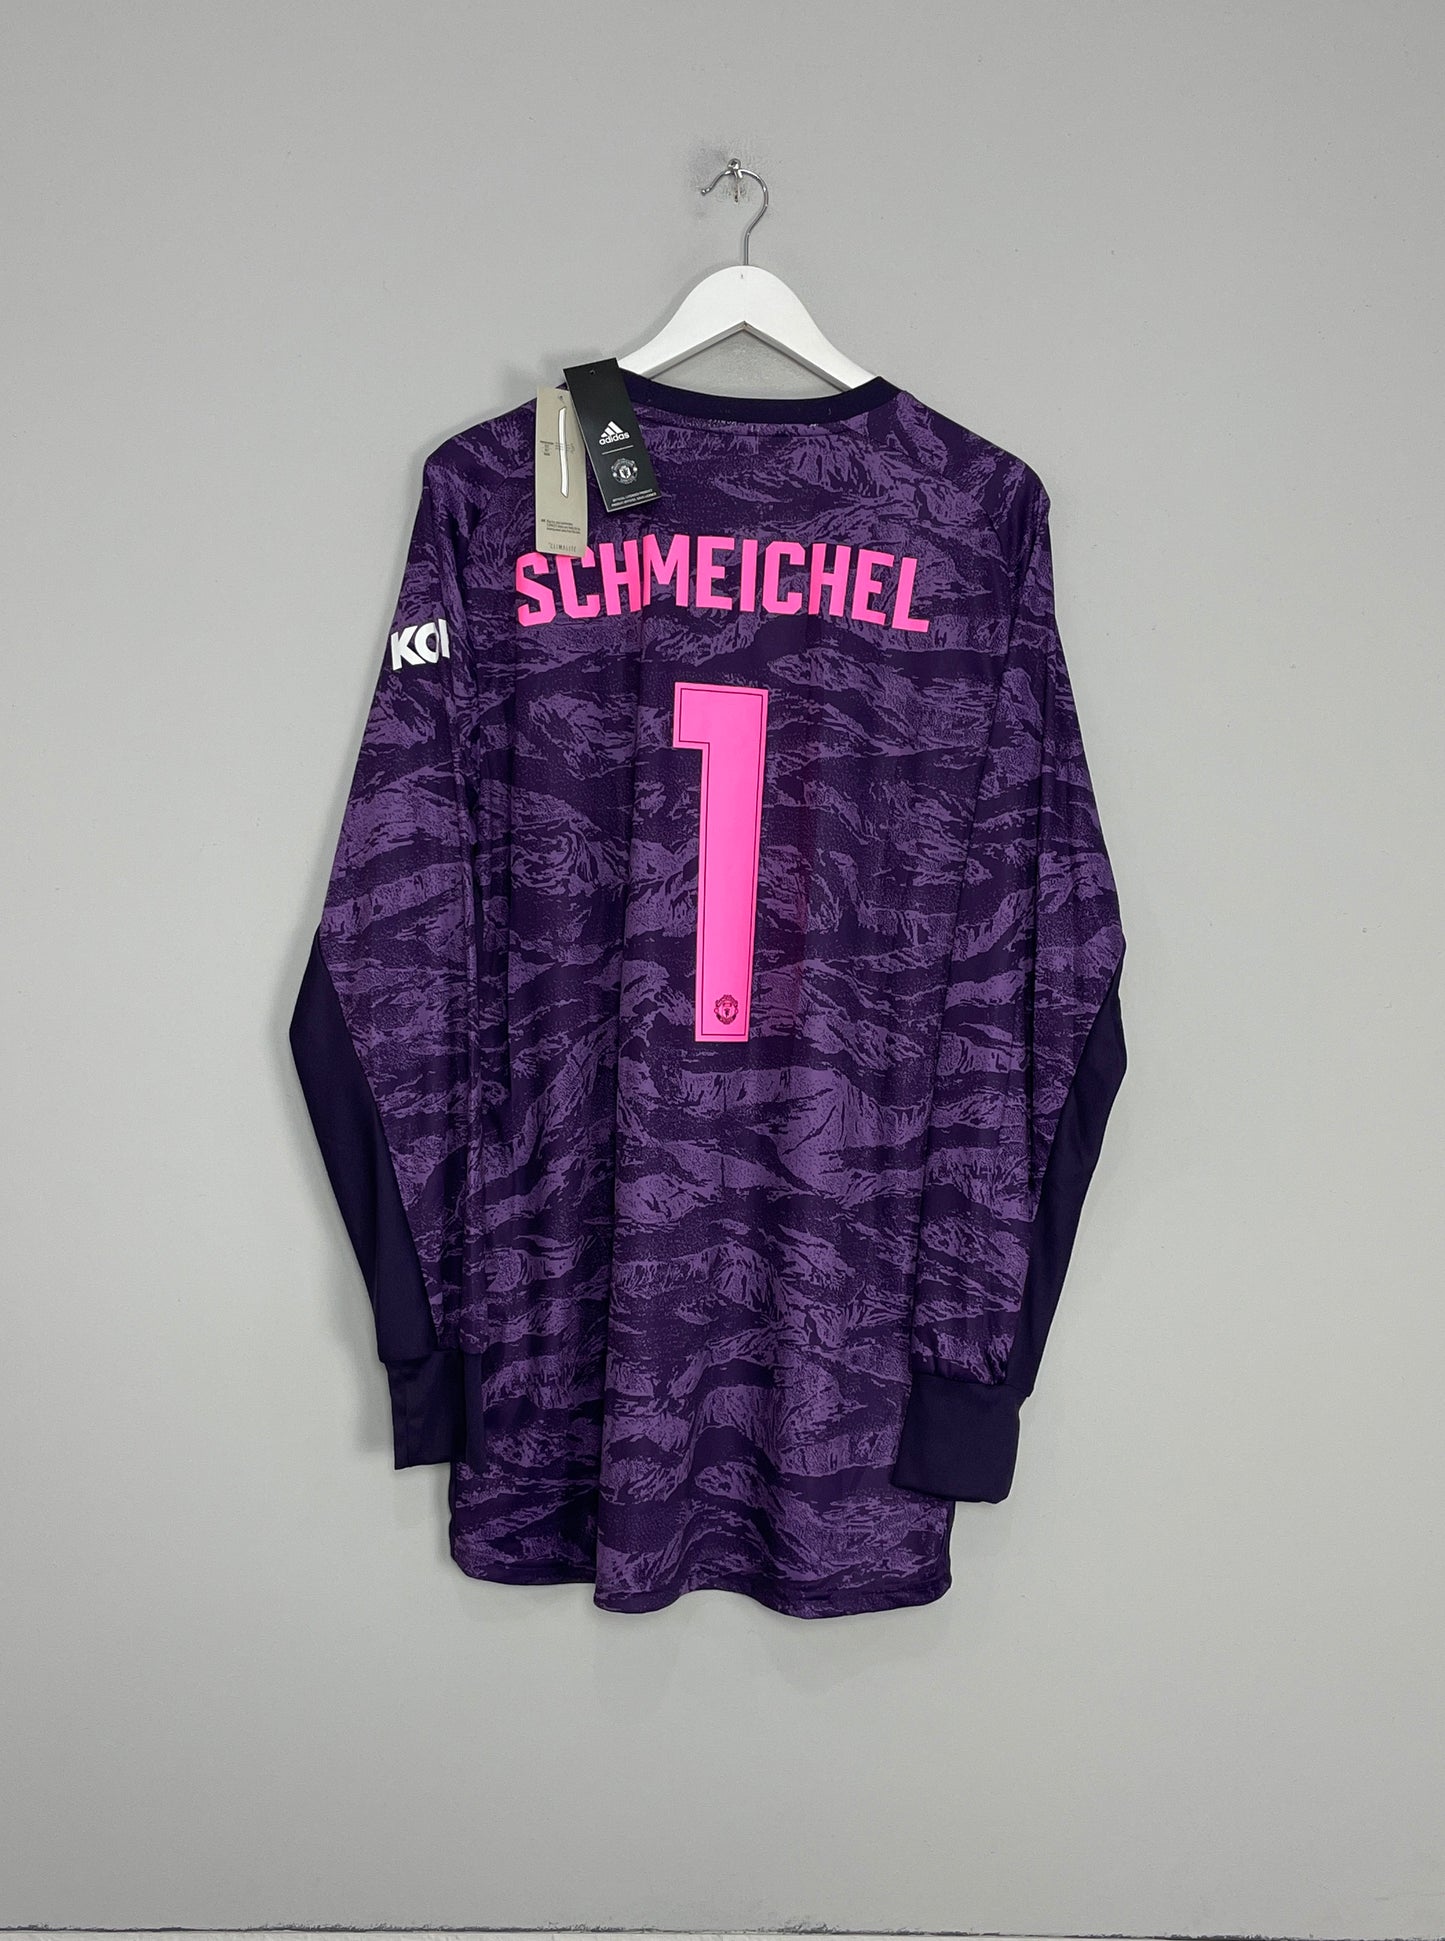 Image of the Manchester United Schmeichel shirt from the 2019/20 season